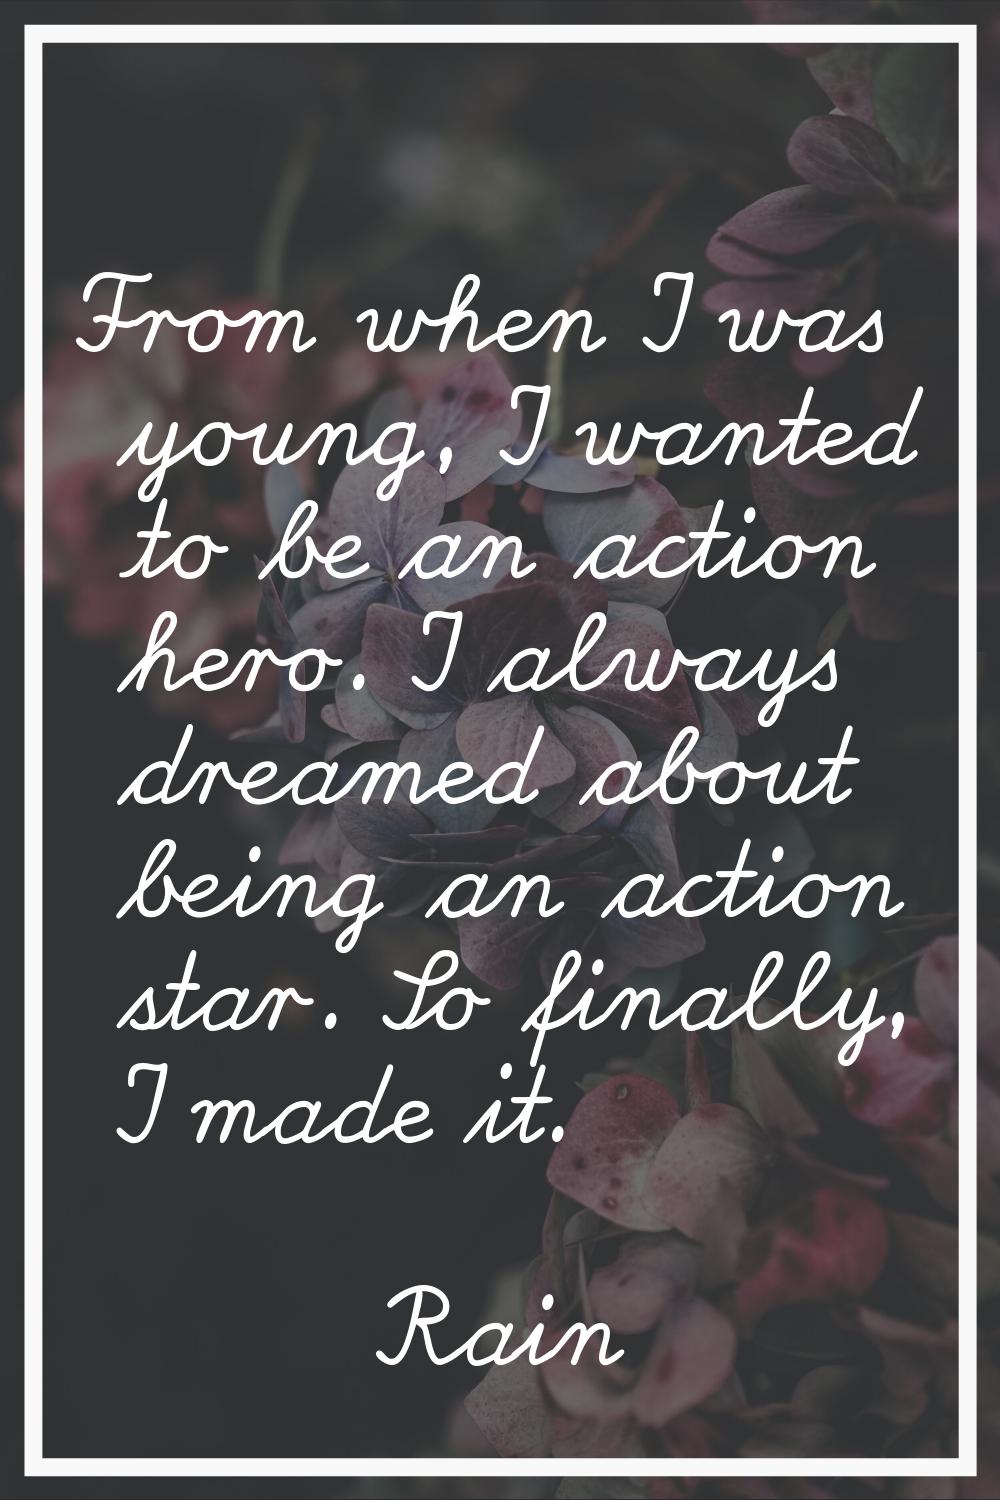 From when I was young, I wanted to be an action hero. I always dreamed about being an action star. 